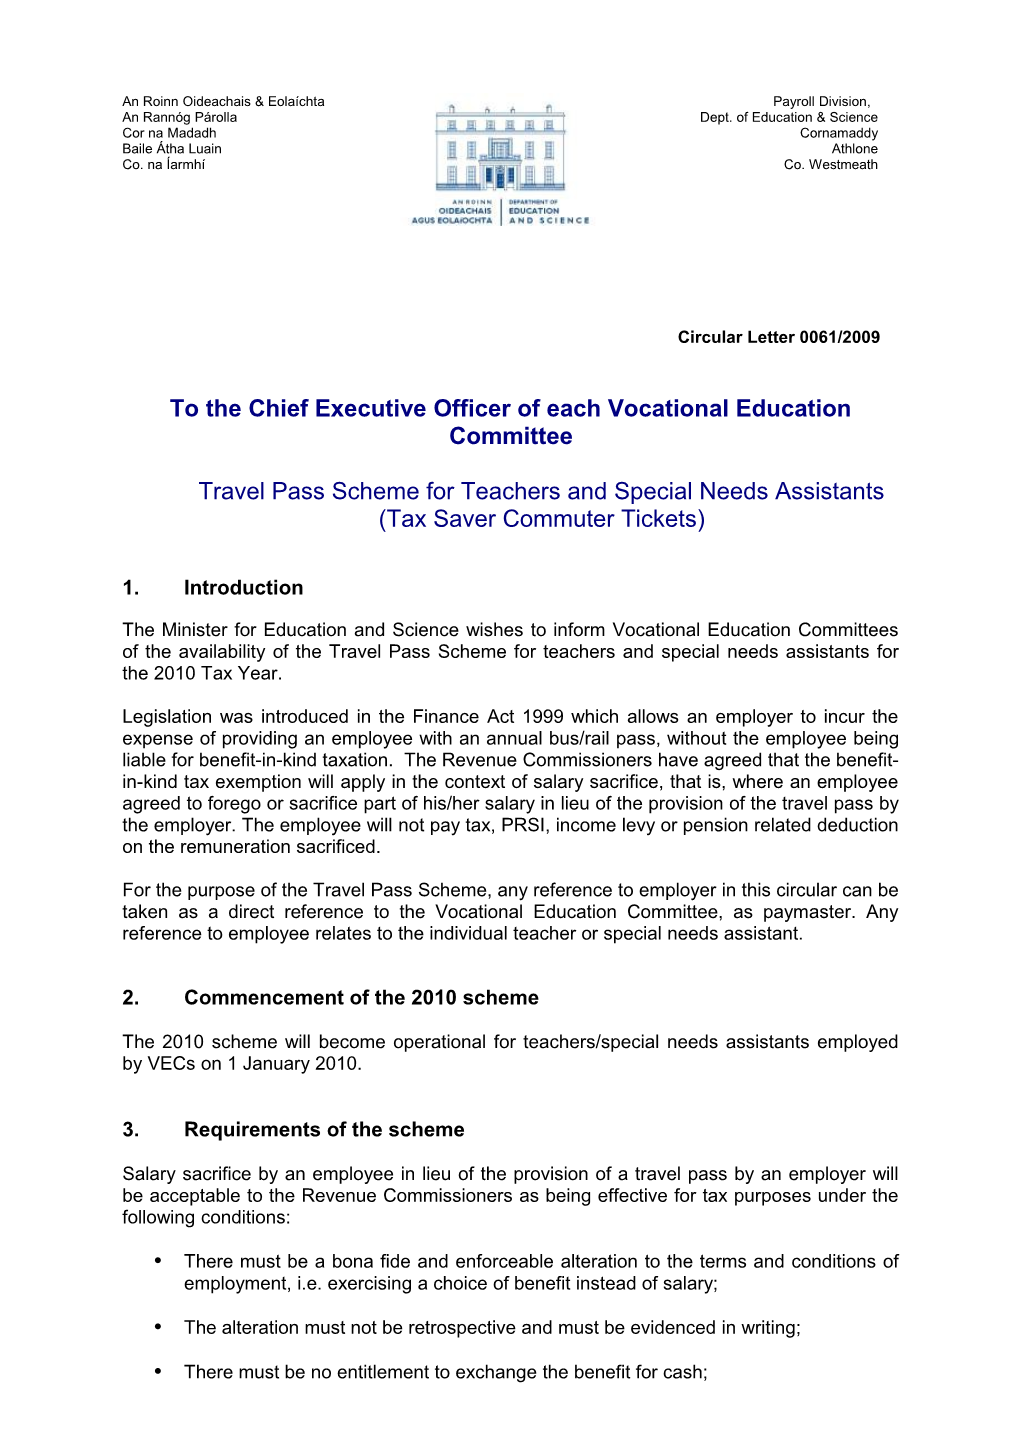 To the Chief Executive Officer of Each Vocational Education Committee